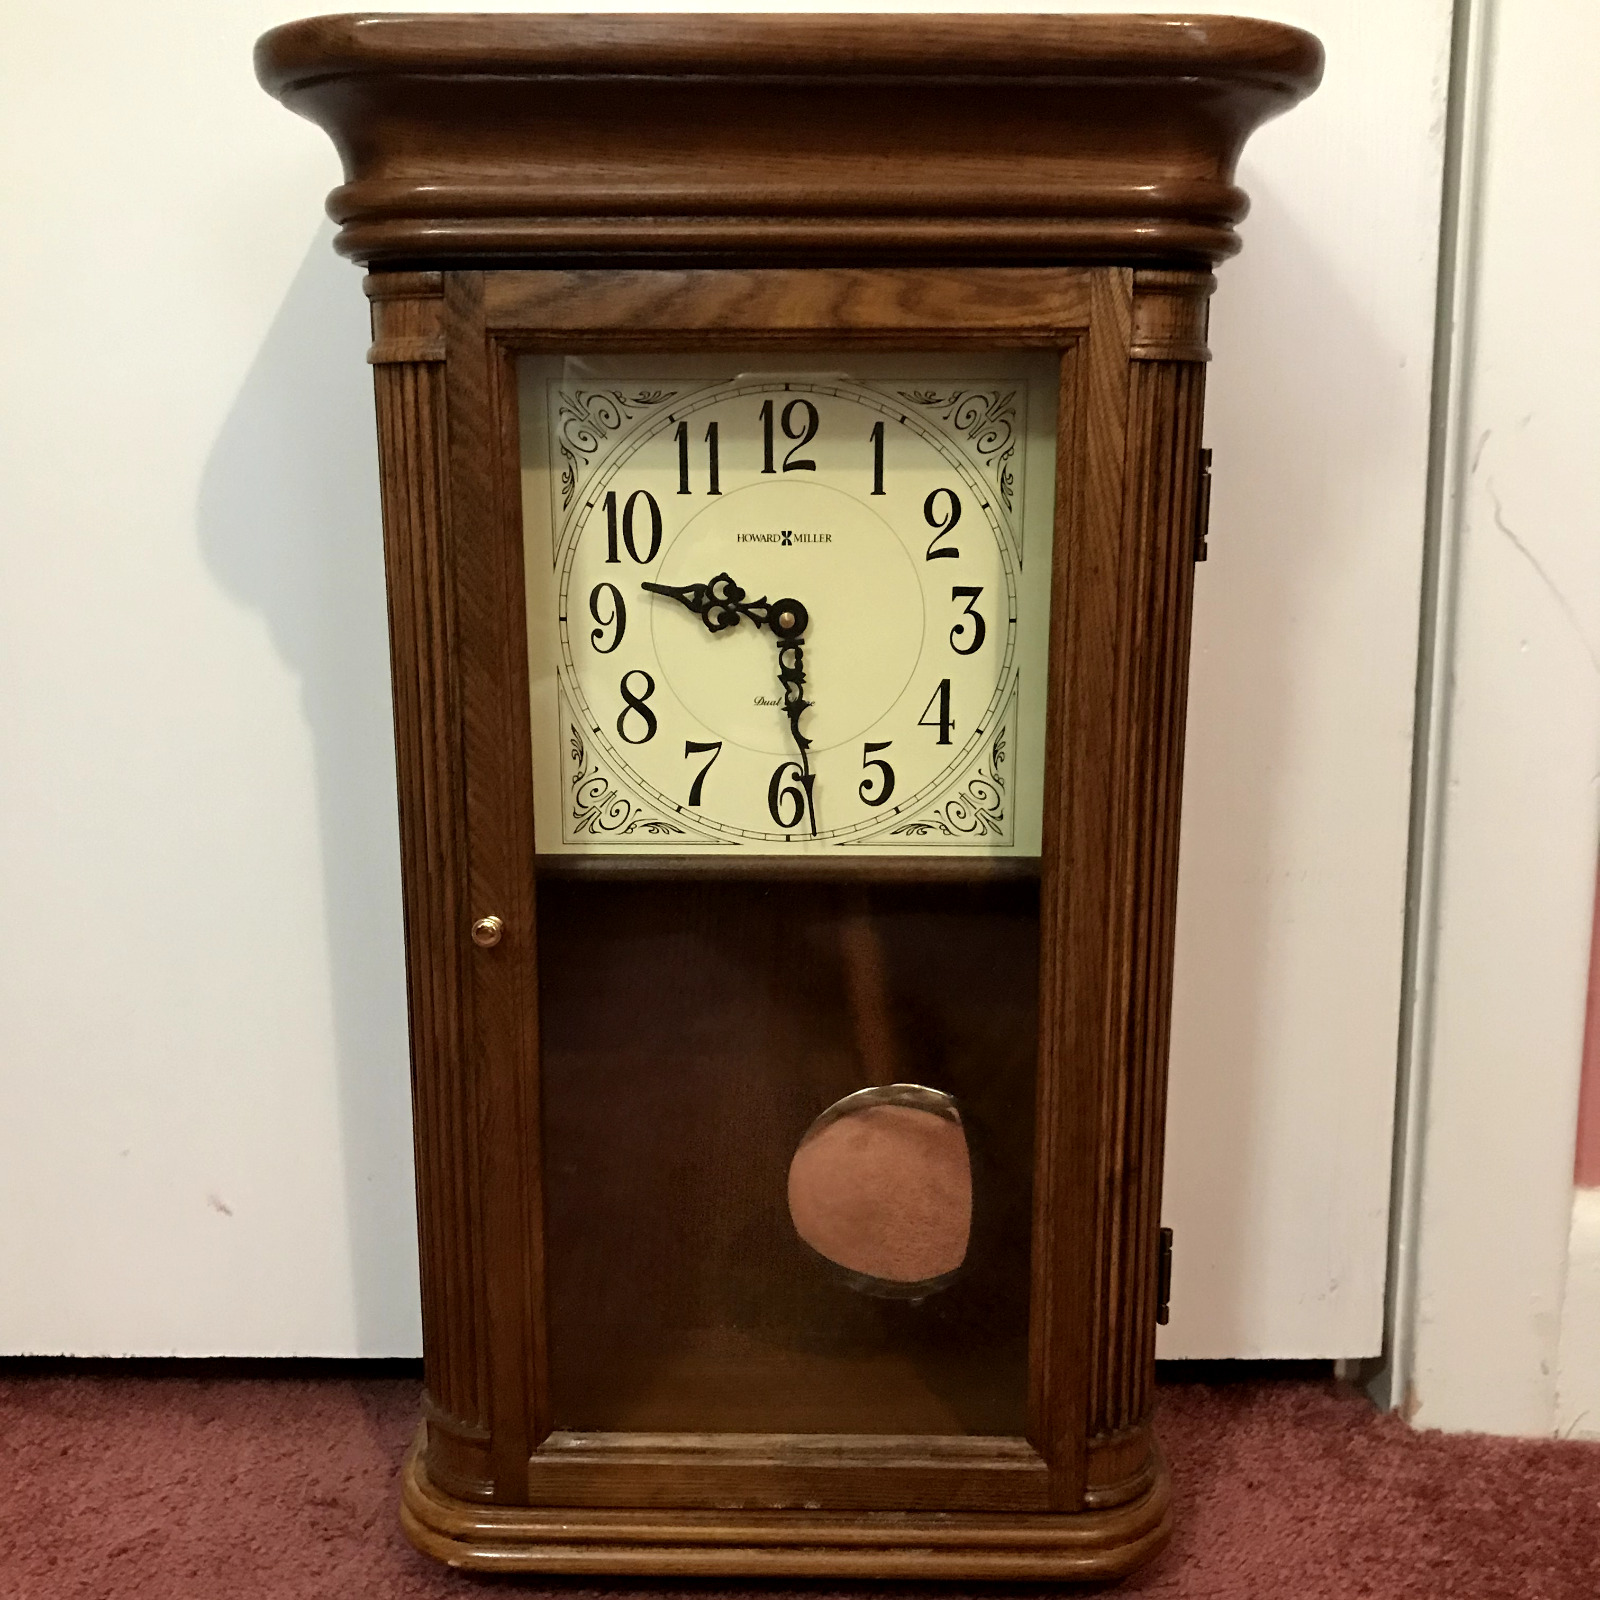 Vintage Howard Miller   Chime Wall Clock Model # 625-281. Excellent Condition